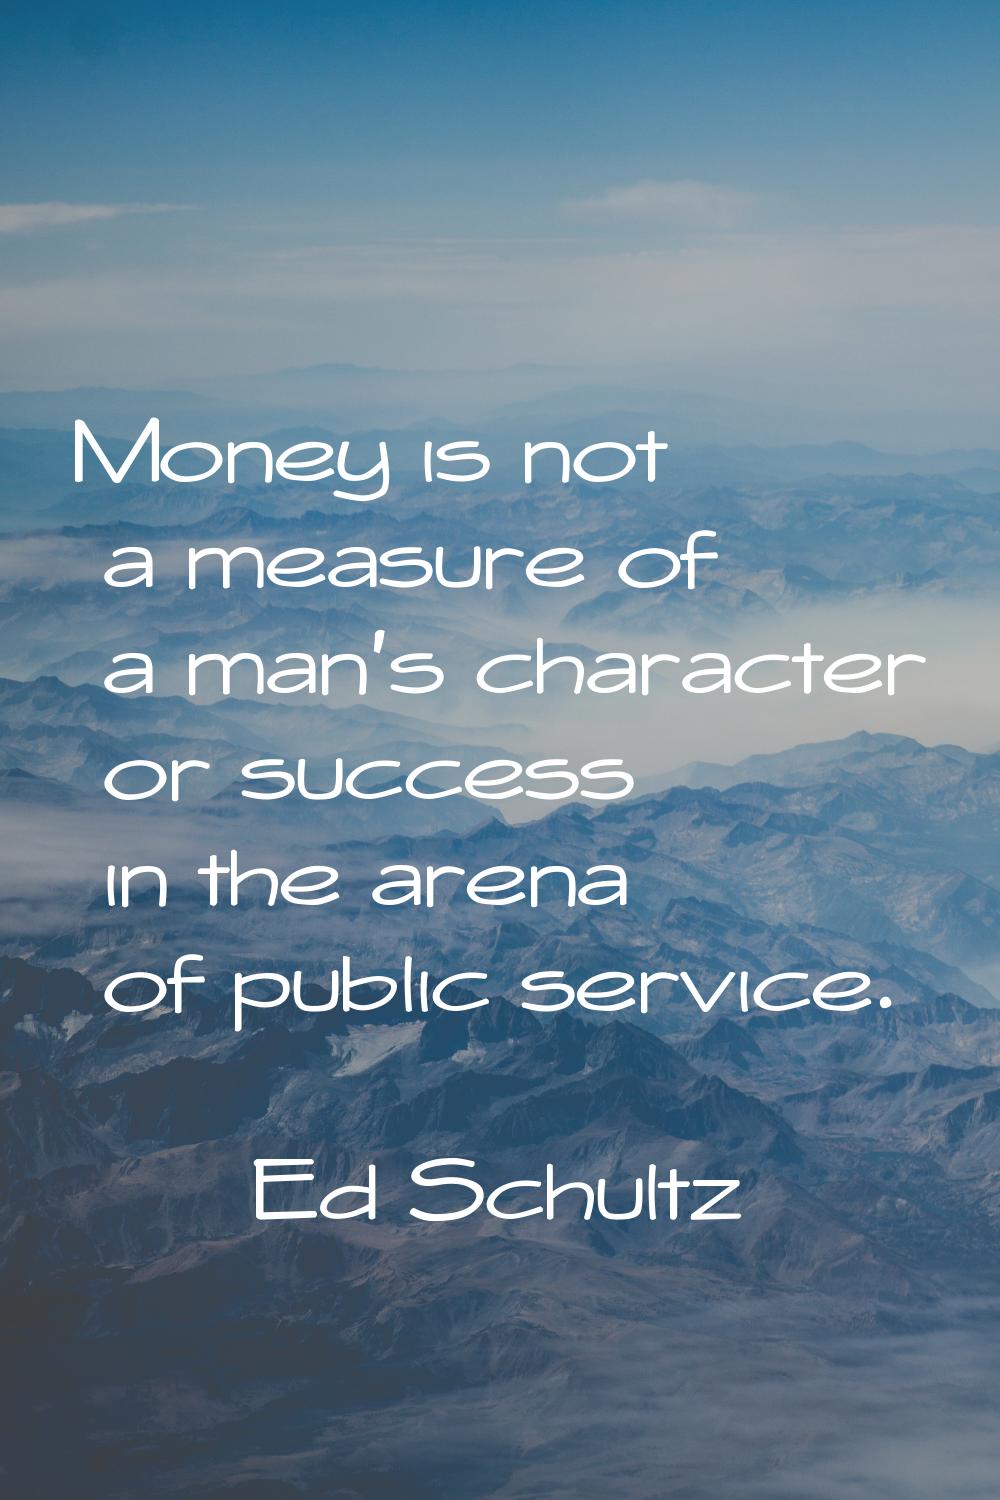 Money is not a measure of a man's character or success in the arena of public service.